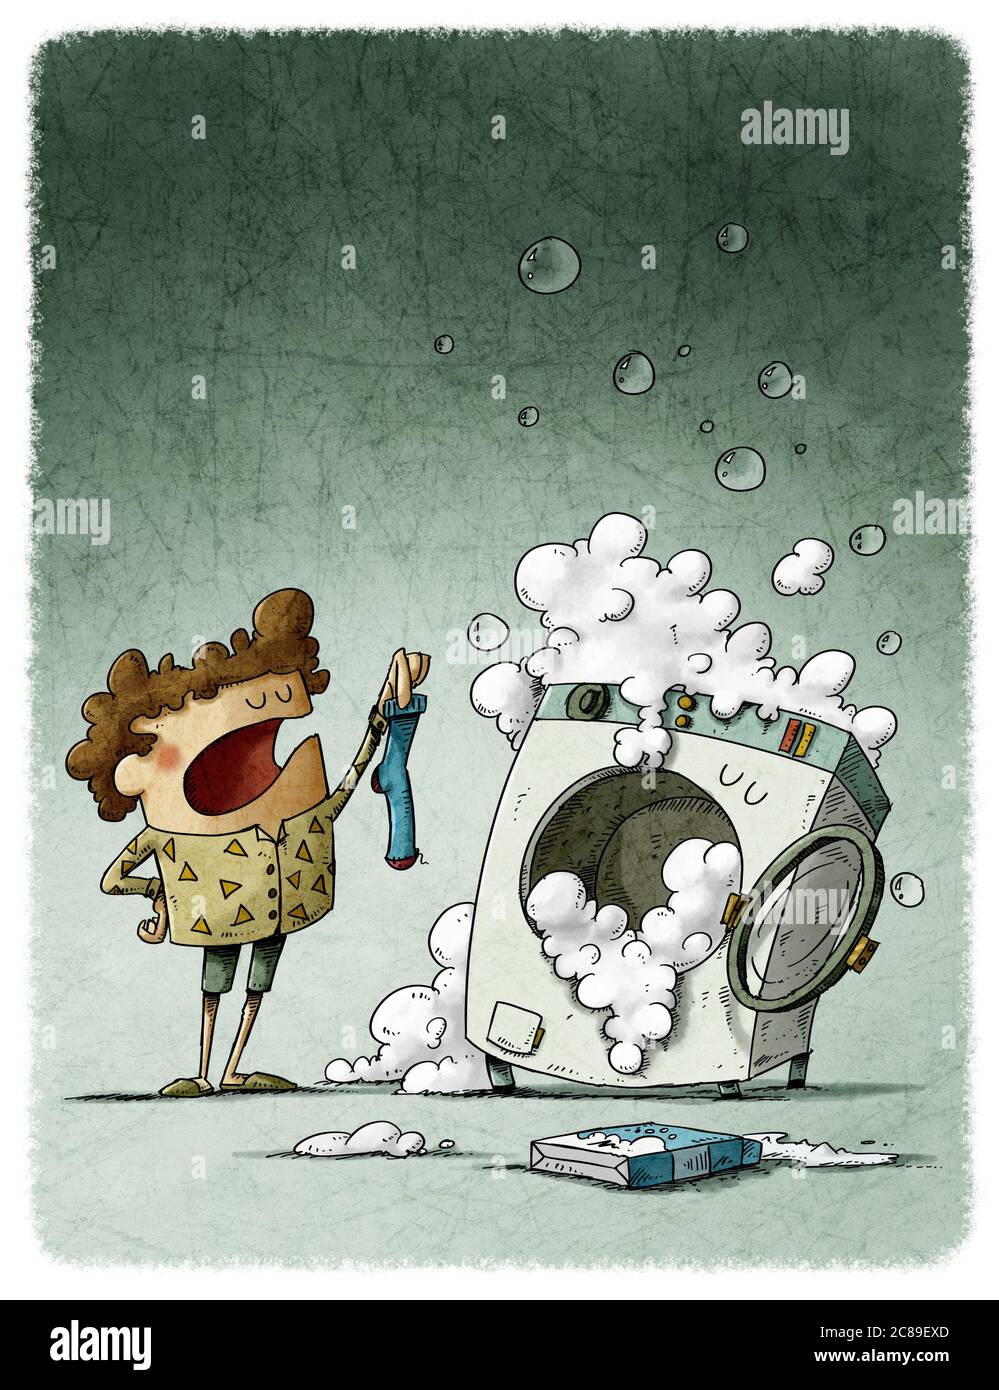 Washer that loses socks. illustration of a boy showing a sock to a funny washing machine that has swallowed the other one. Stock Photo